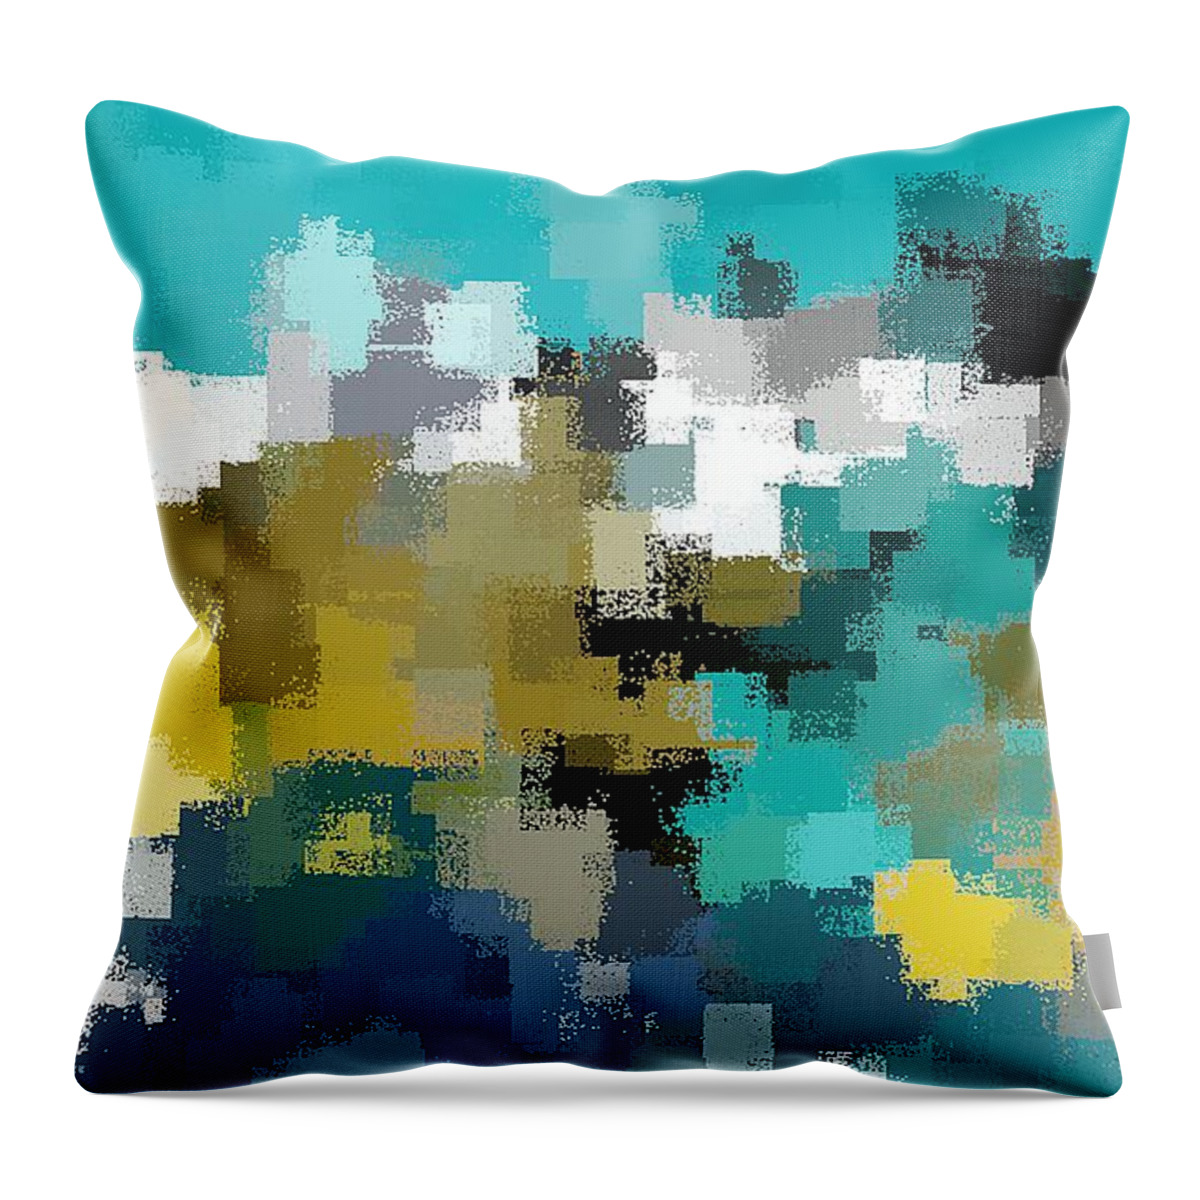 Turquoise Throw Pillow featuring the digital art Turquoise and Gold by David Manlove